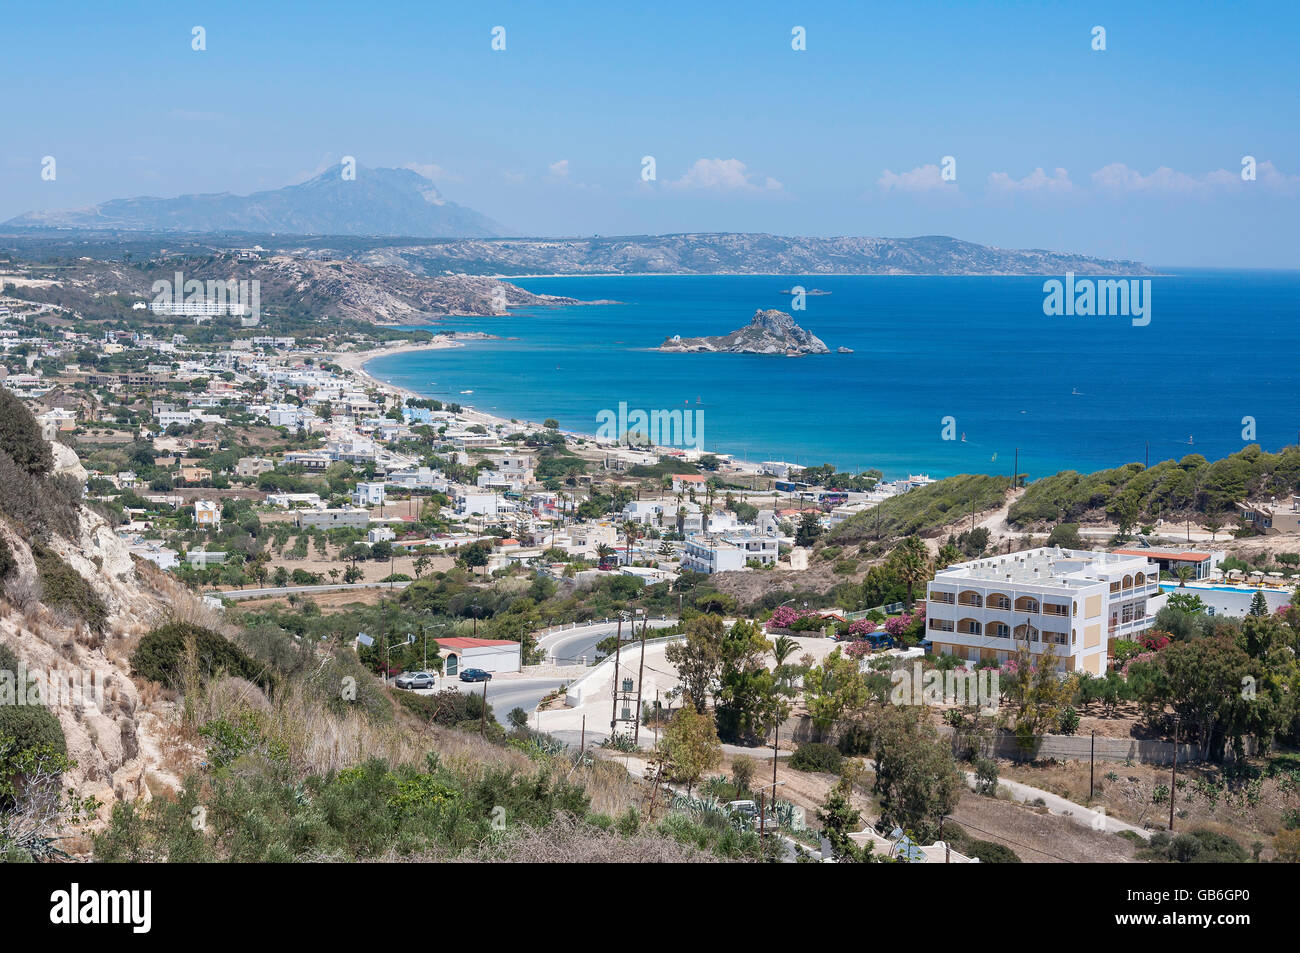 View of Kamari Bay from Kefalos Town, Kos (Cos), The Dodecanese, South Aegean Region, Greece Stock Photo